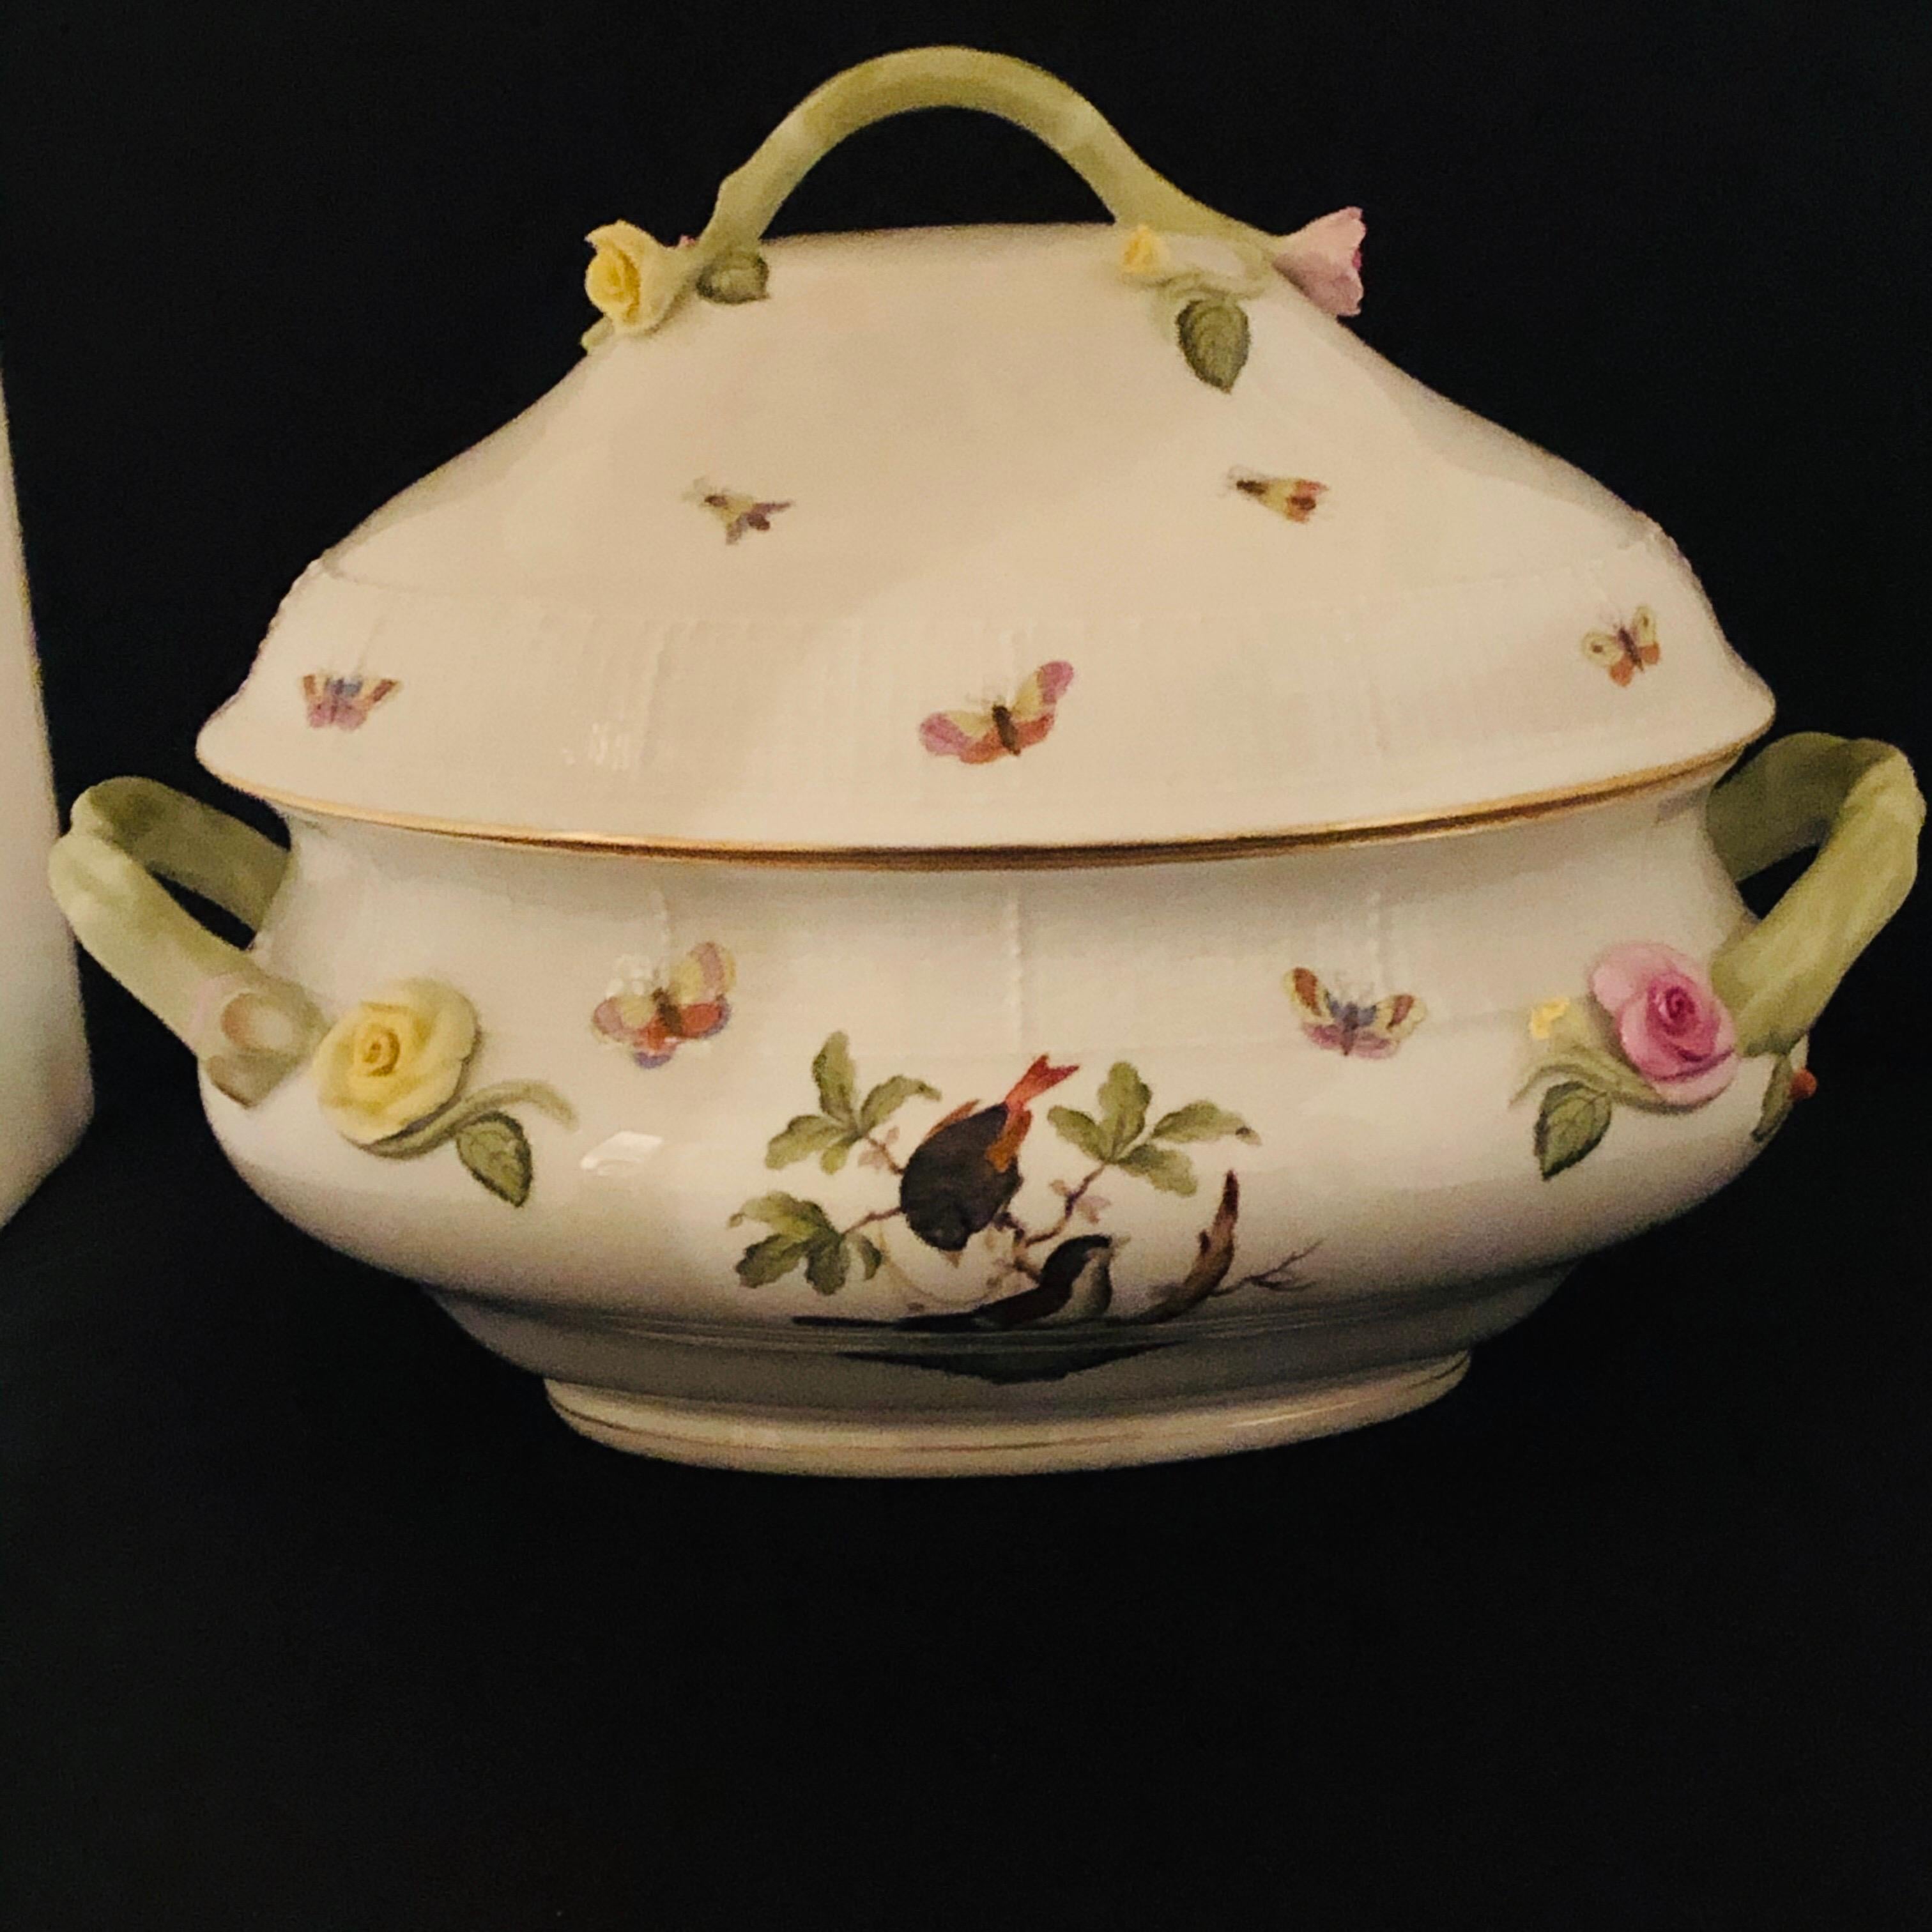 Hand-Painted Oversized Herend Rothschild Bird Soup Tureen with Raised Flower Decoration